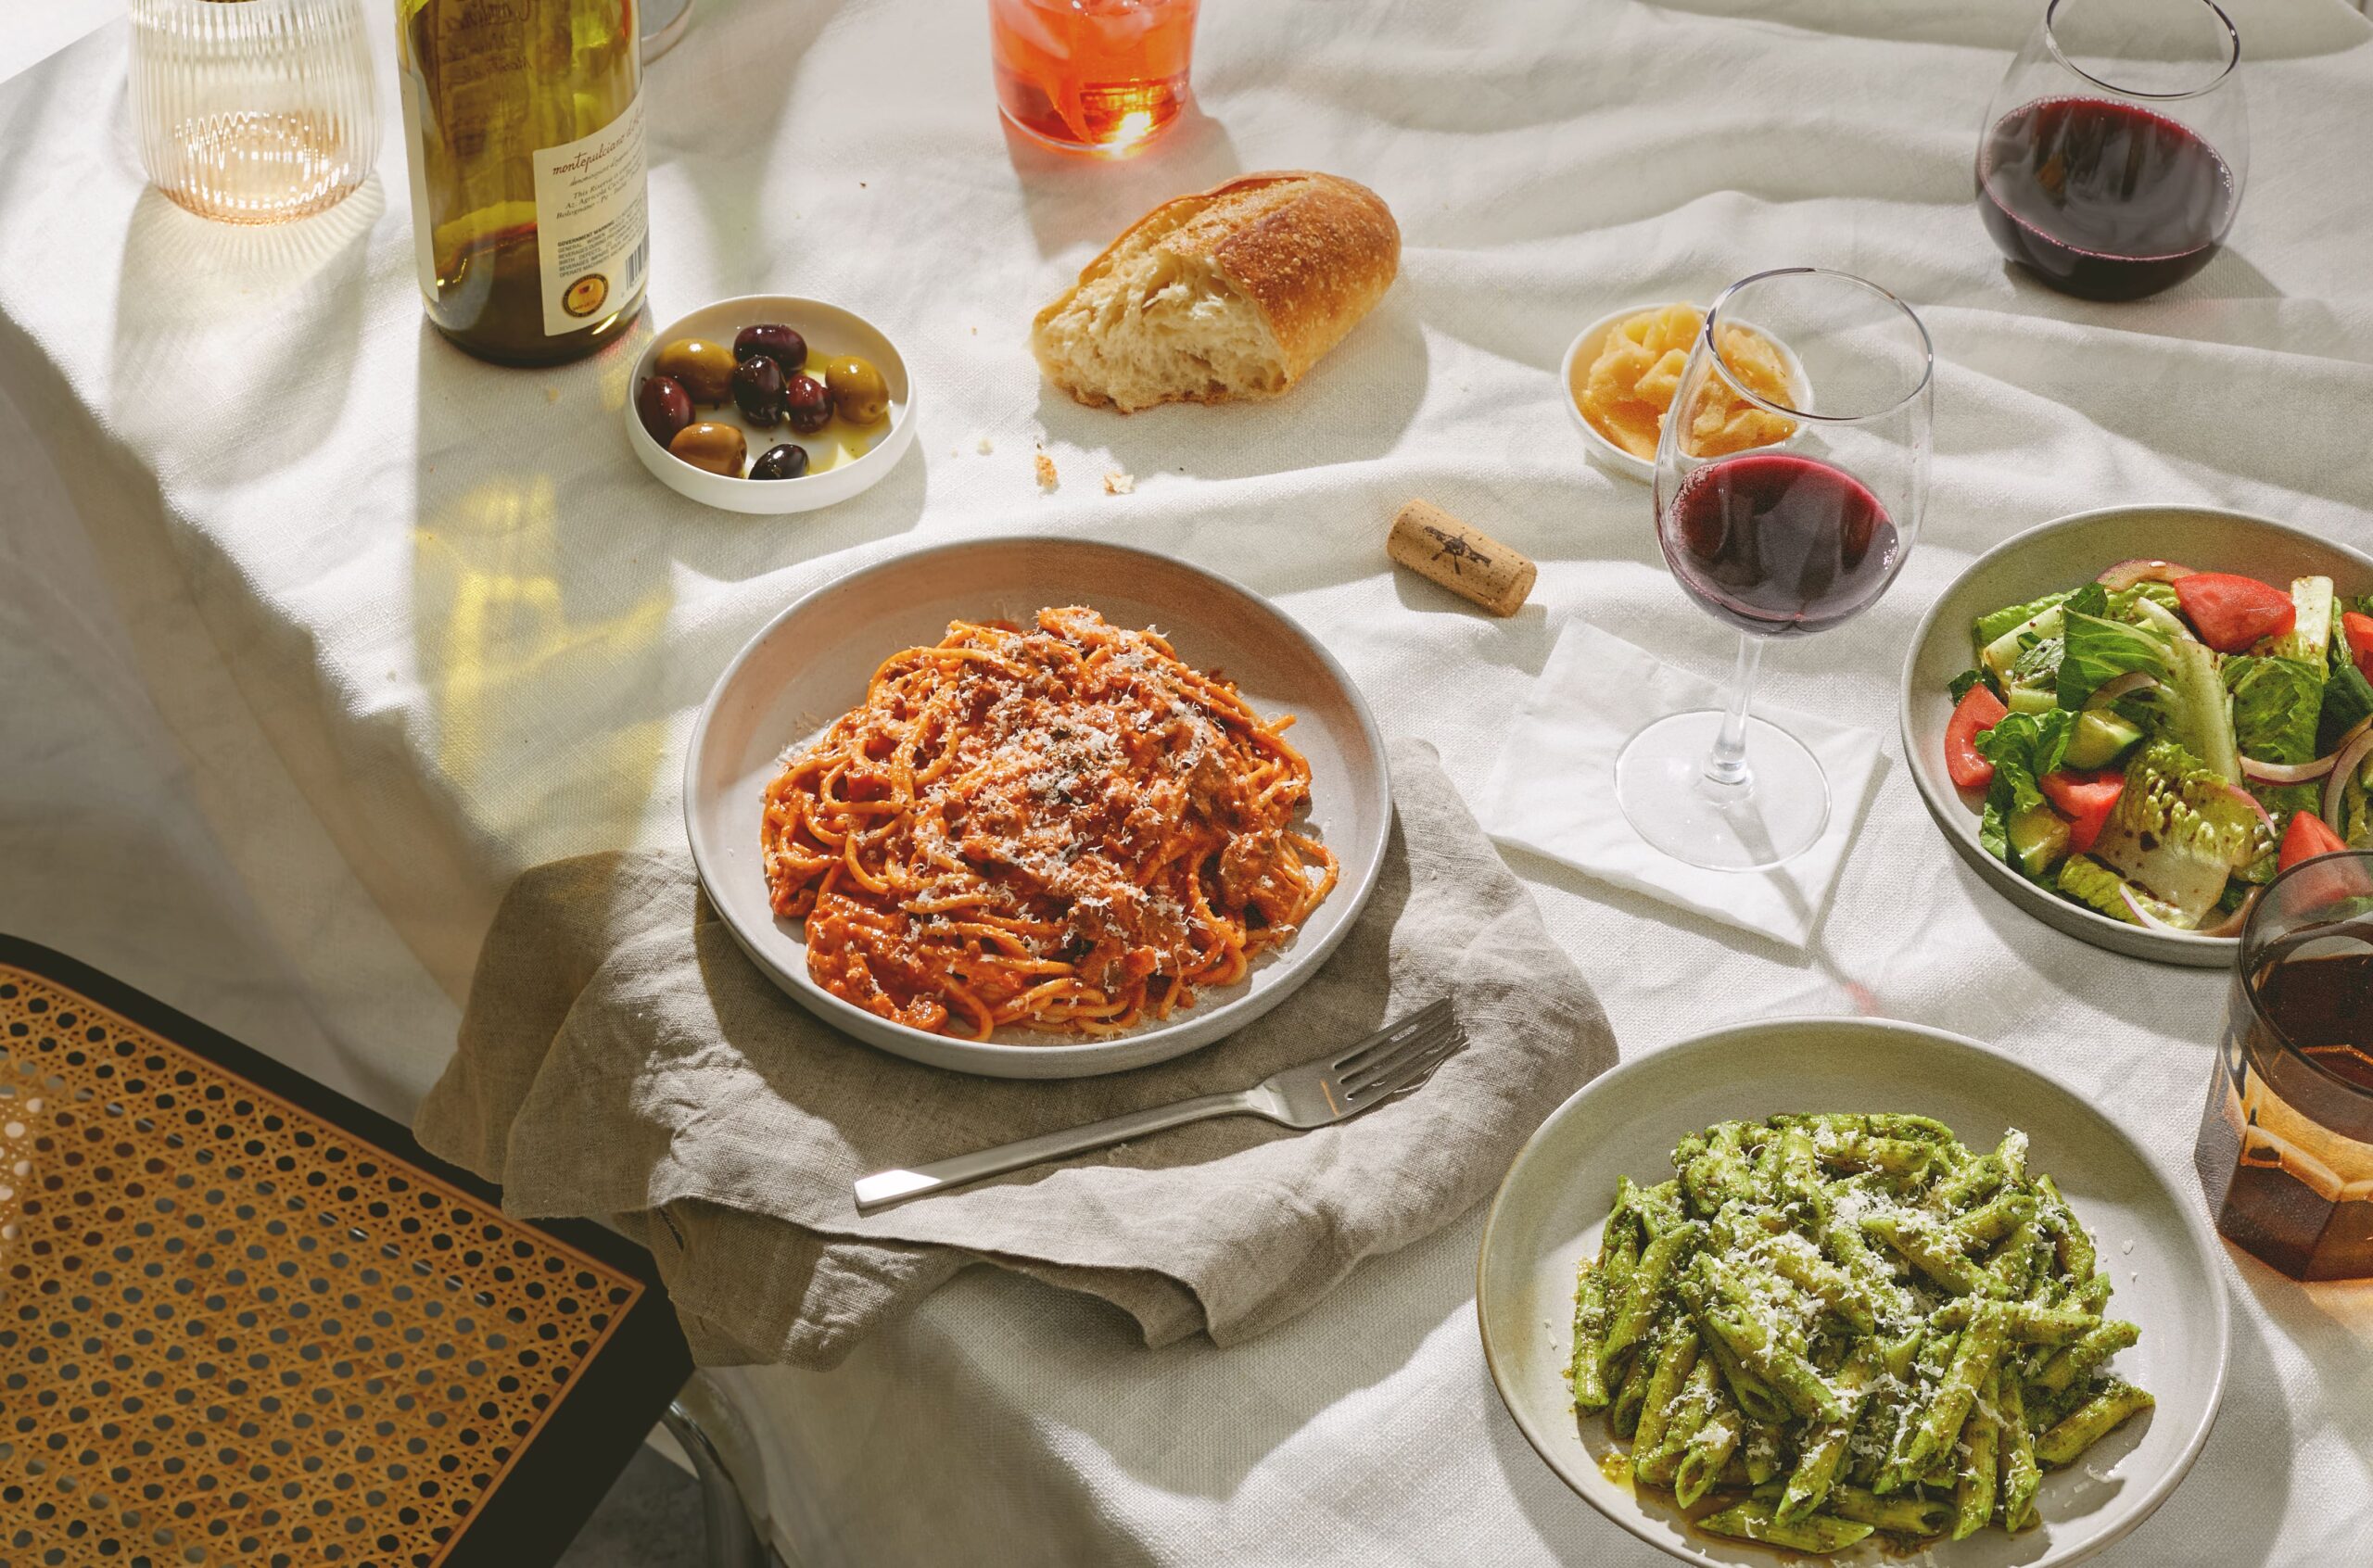 Image of salad, spaghetti marinara, and pesto penne on a table with wine and bread accents